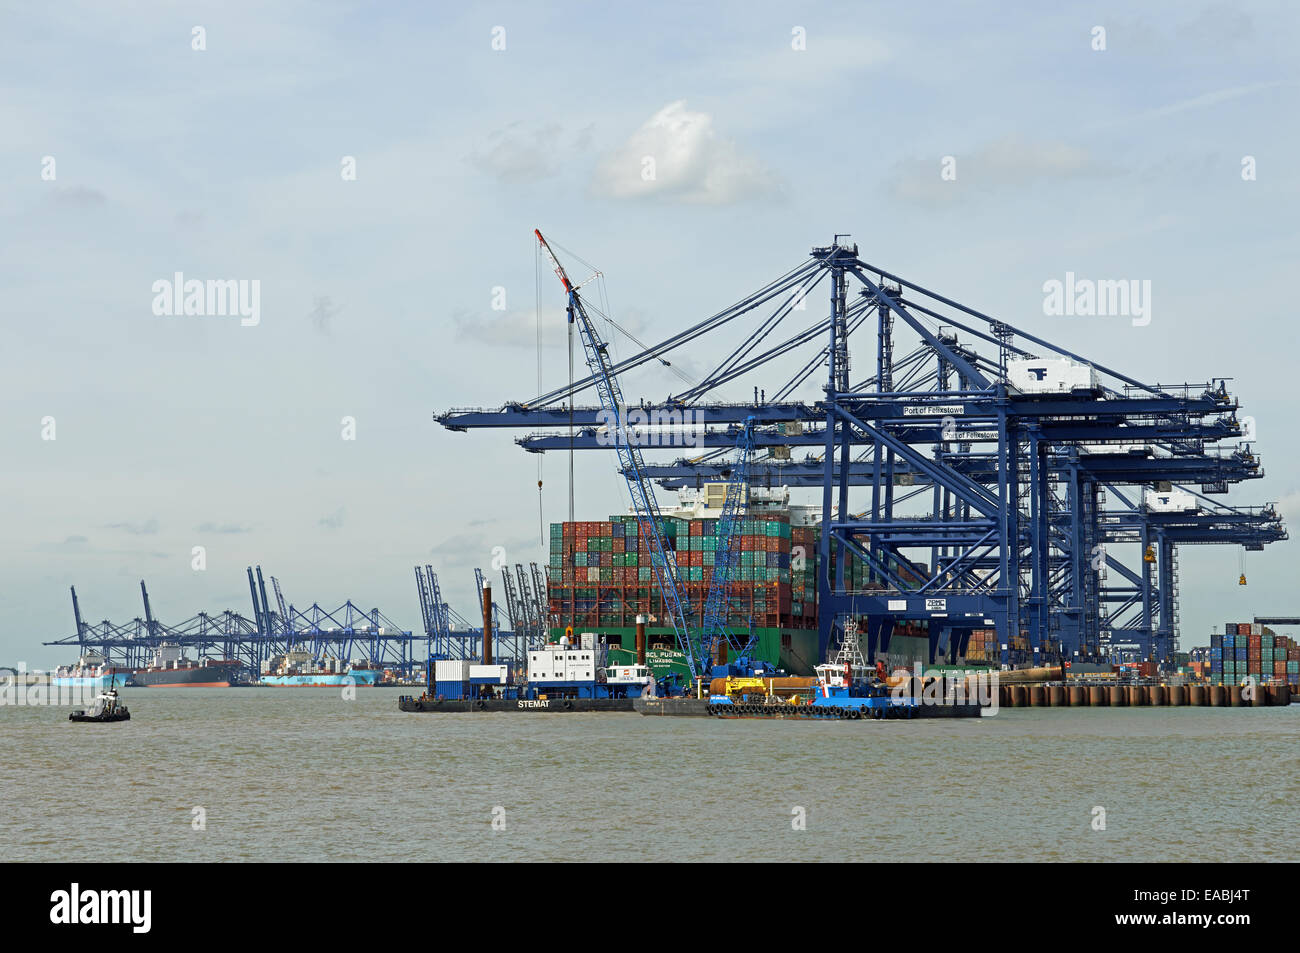 Steel piles onboard the Forth Constructor barge carrying out work at Berths 8 & 9 at the port of Felixstowe, Suffolk, UK. Stock Photo